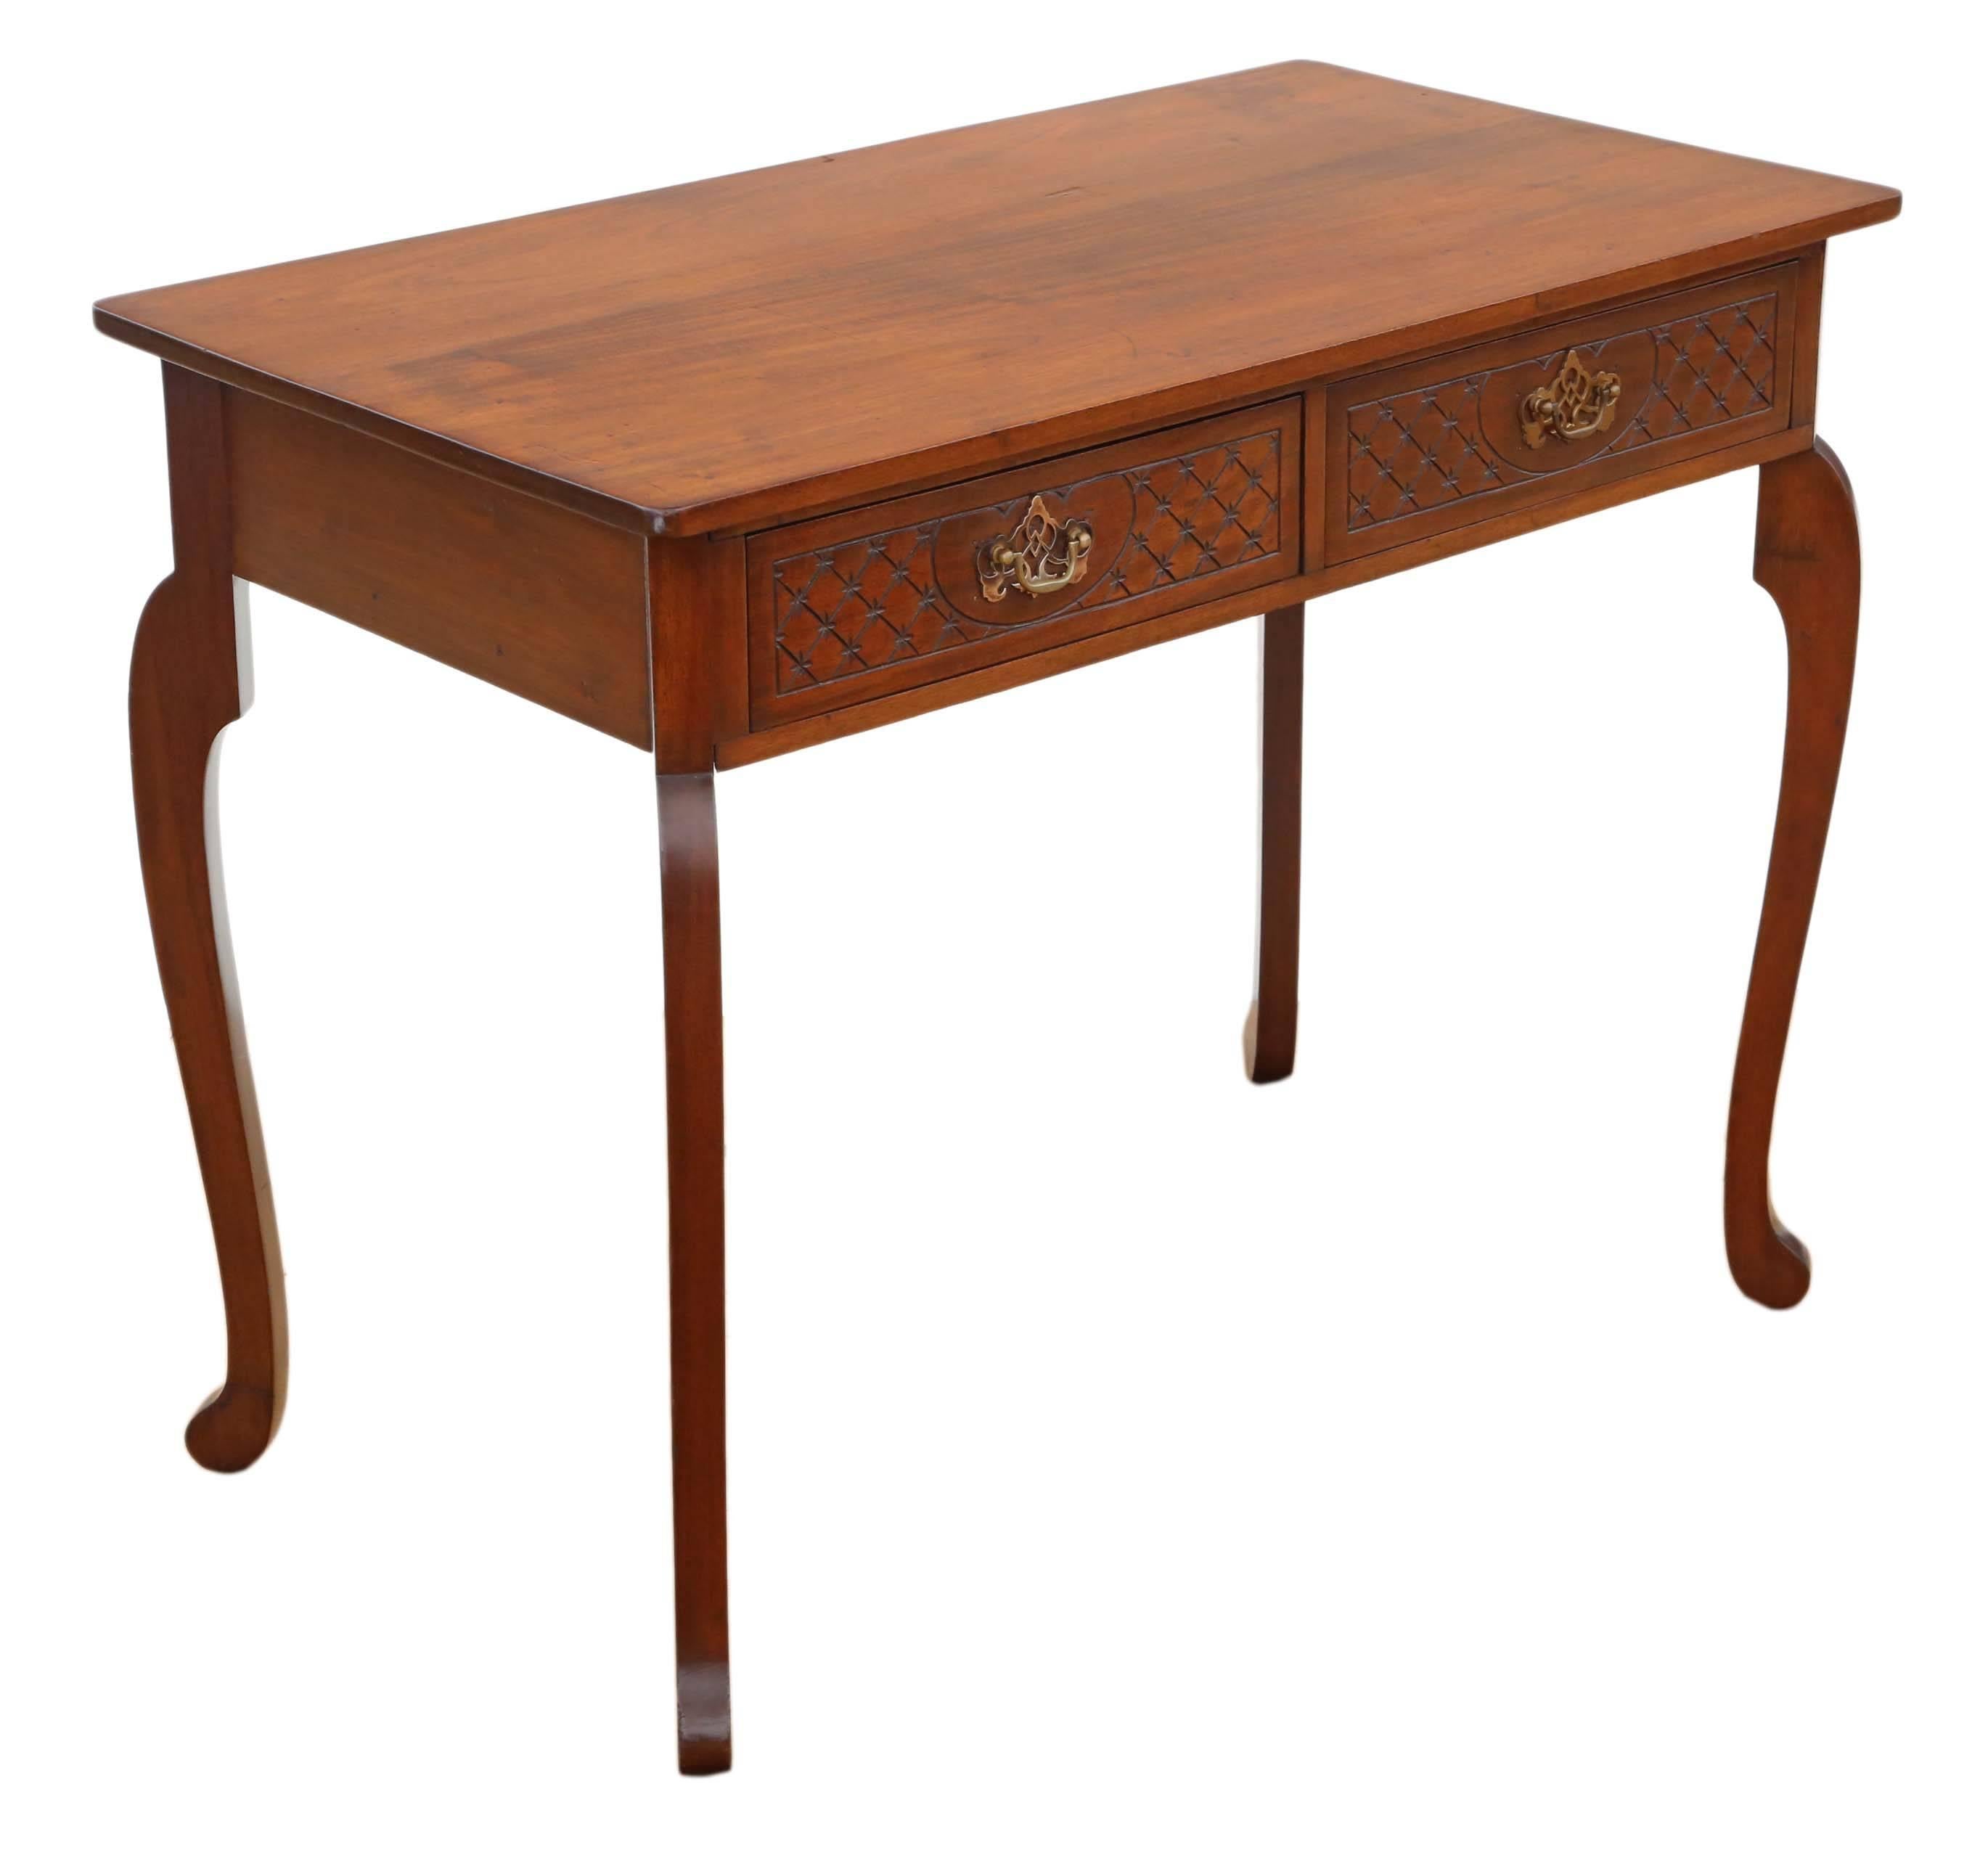 Antique Victorian Aesthetic circa 1900 Mahogany Writing Desk or Dressing Table For Sale 2